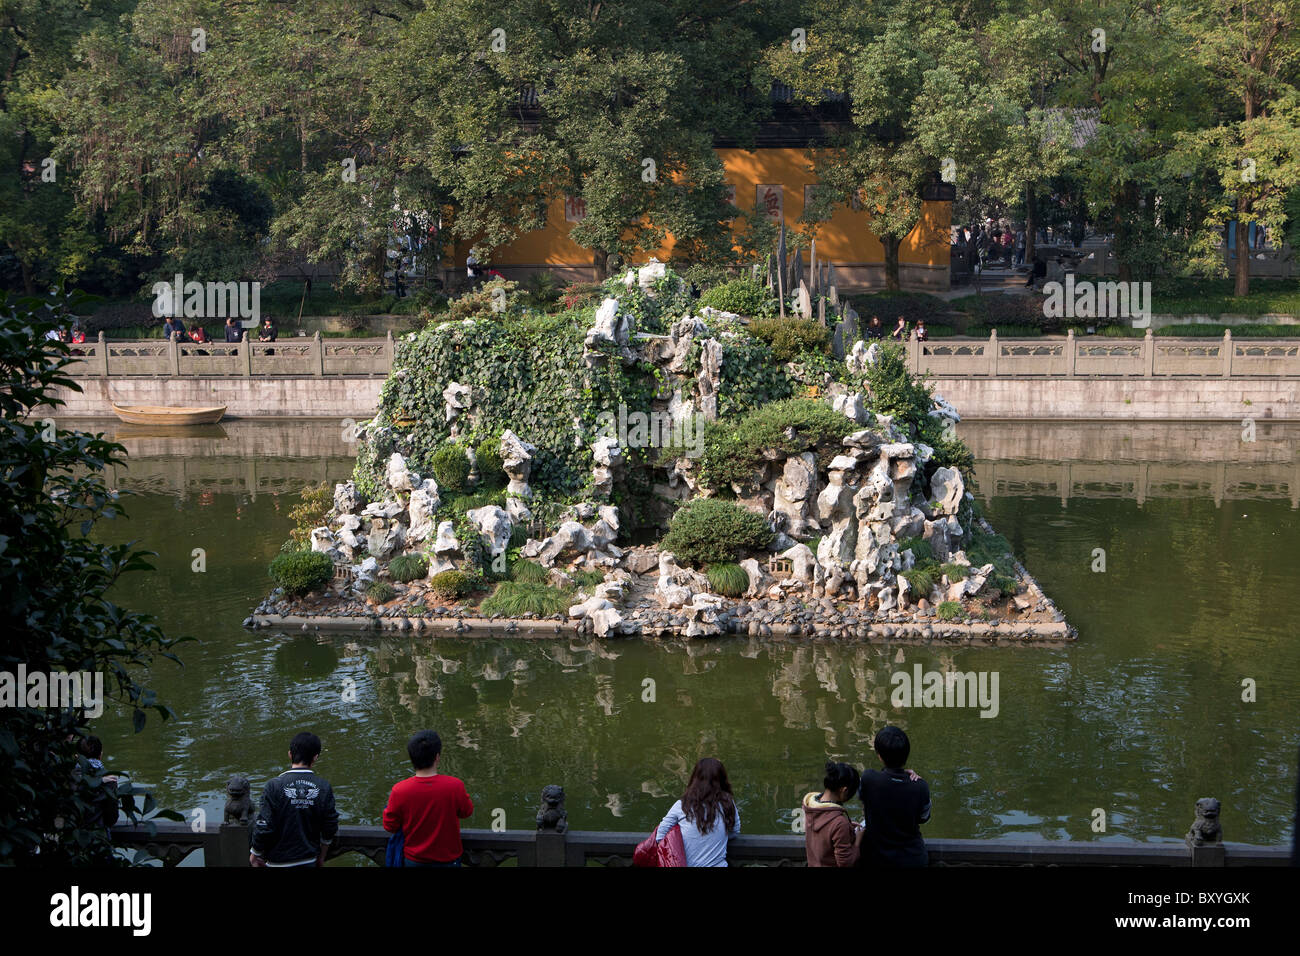 People looking at Turtle Pond near the West Lake in Hangzhou Stock Photo